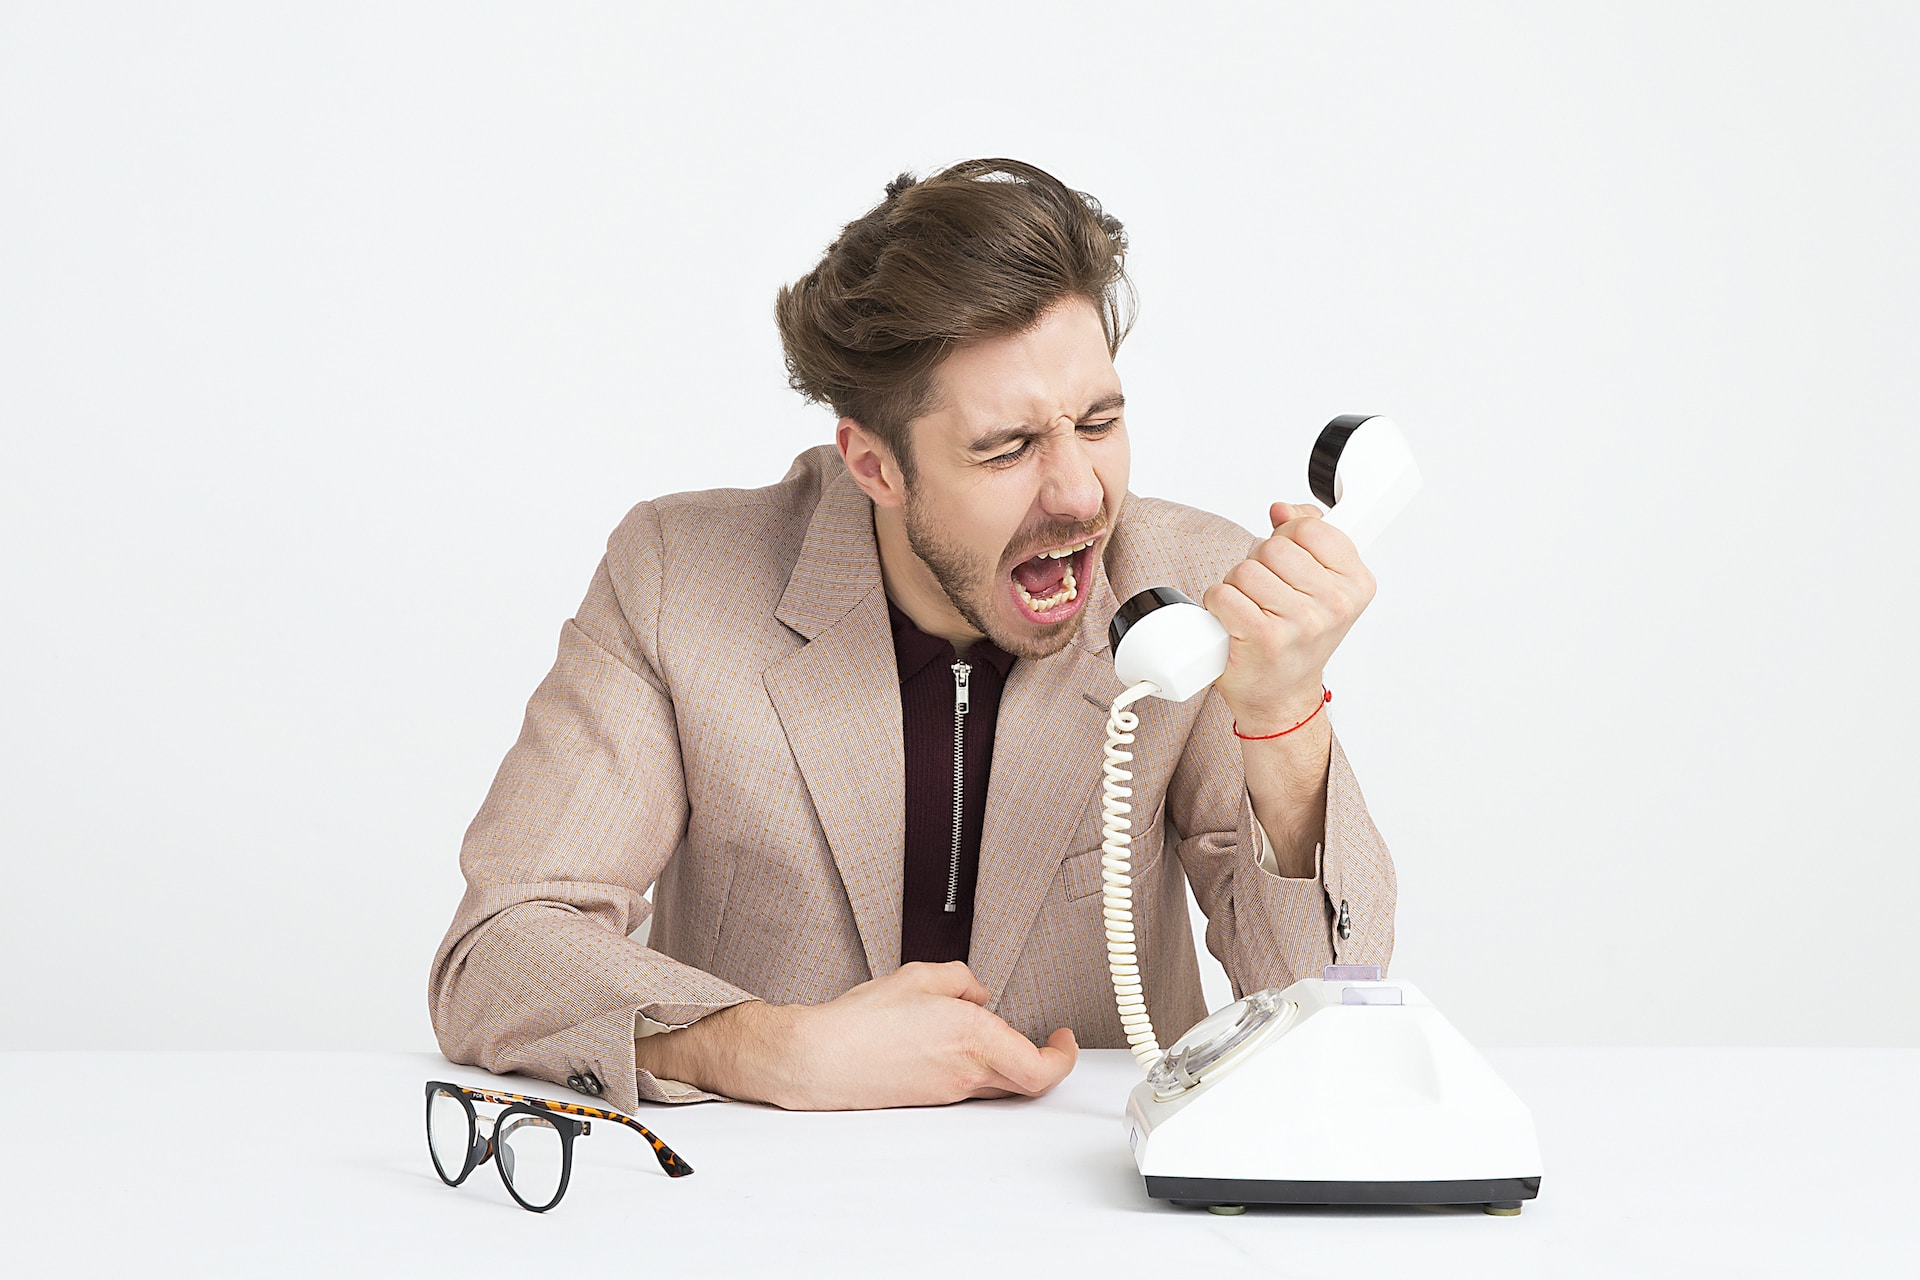 A man screaming into a phone.